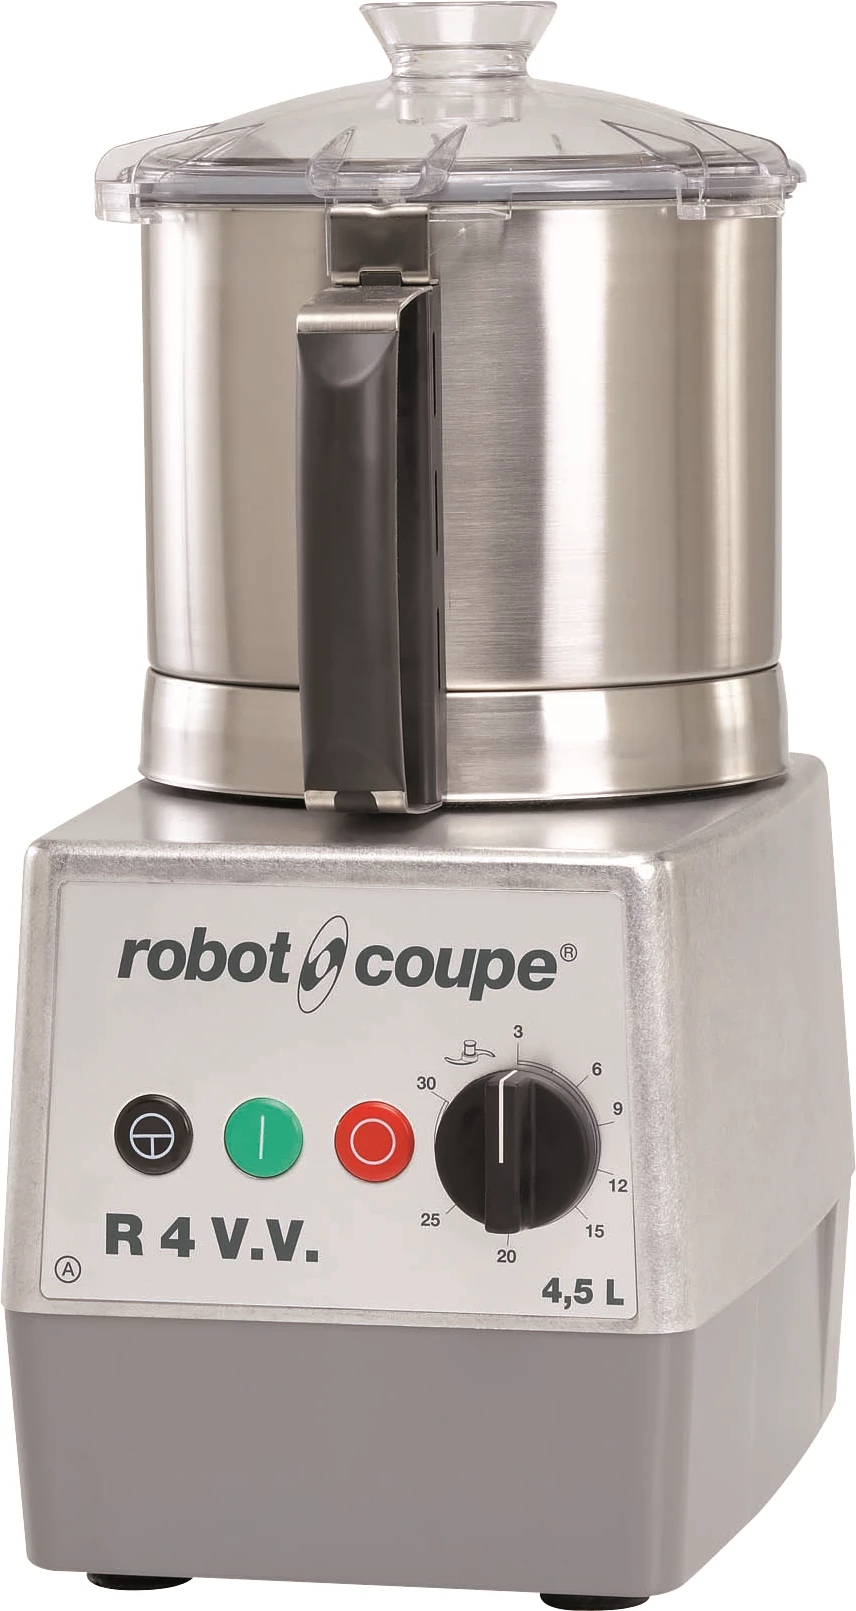 Robot Coupe R4 VV cutter